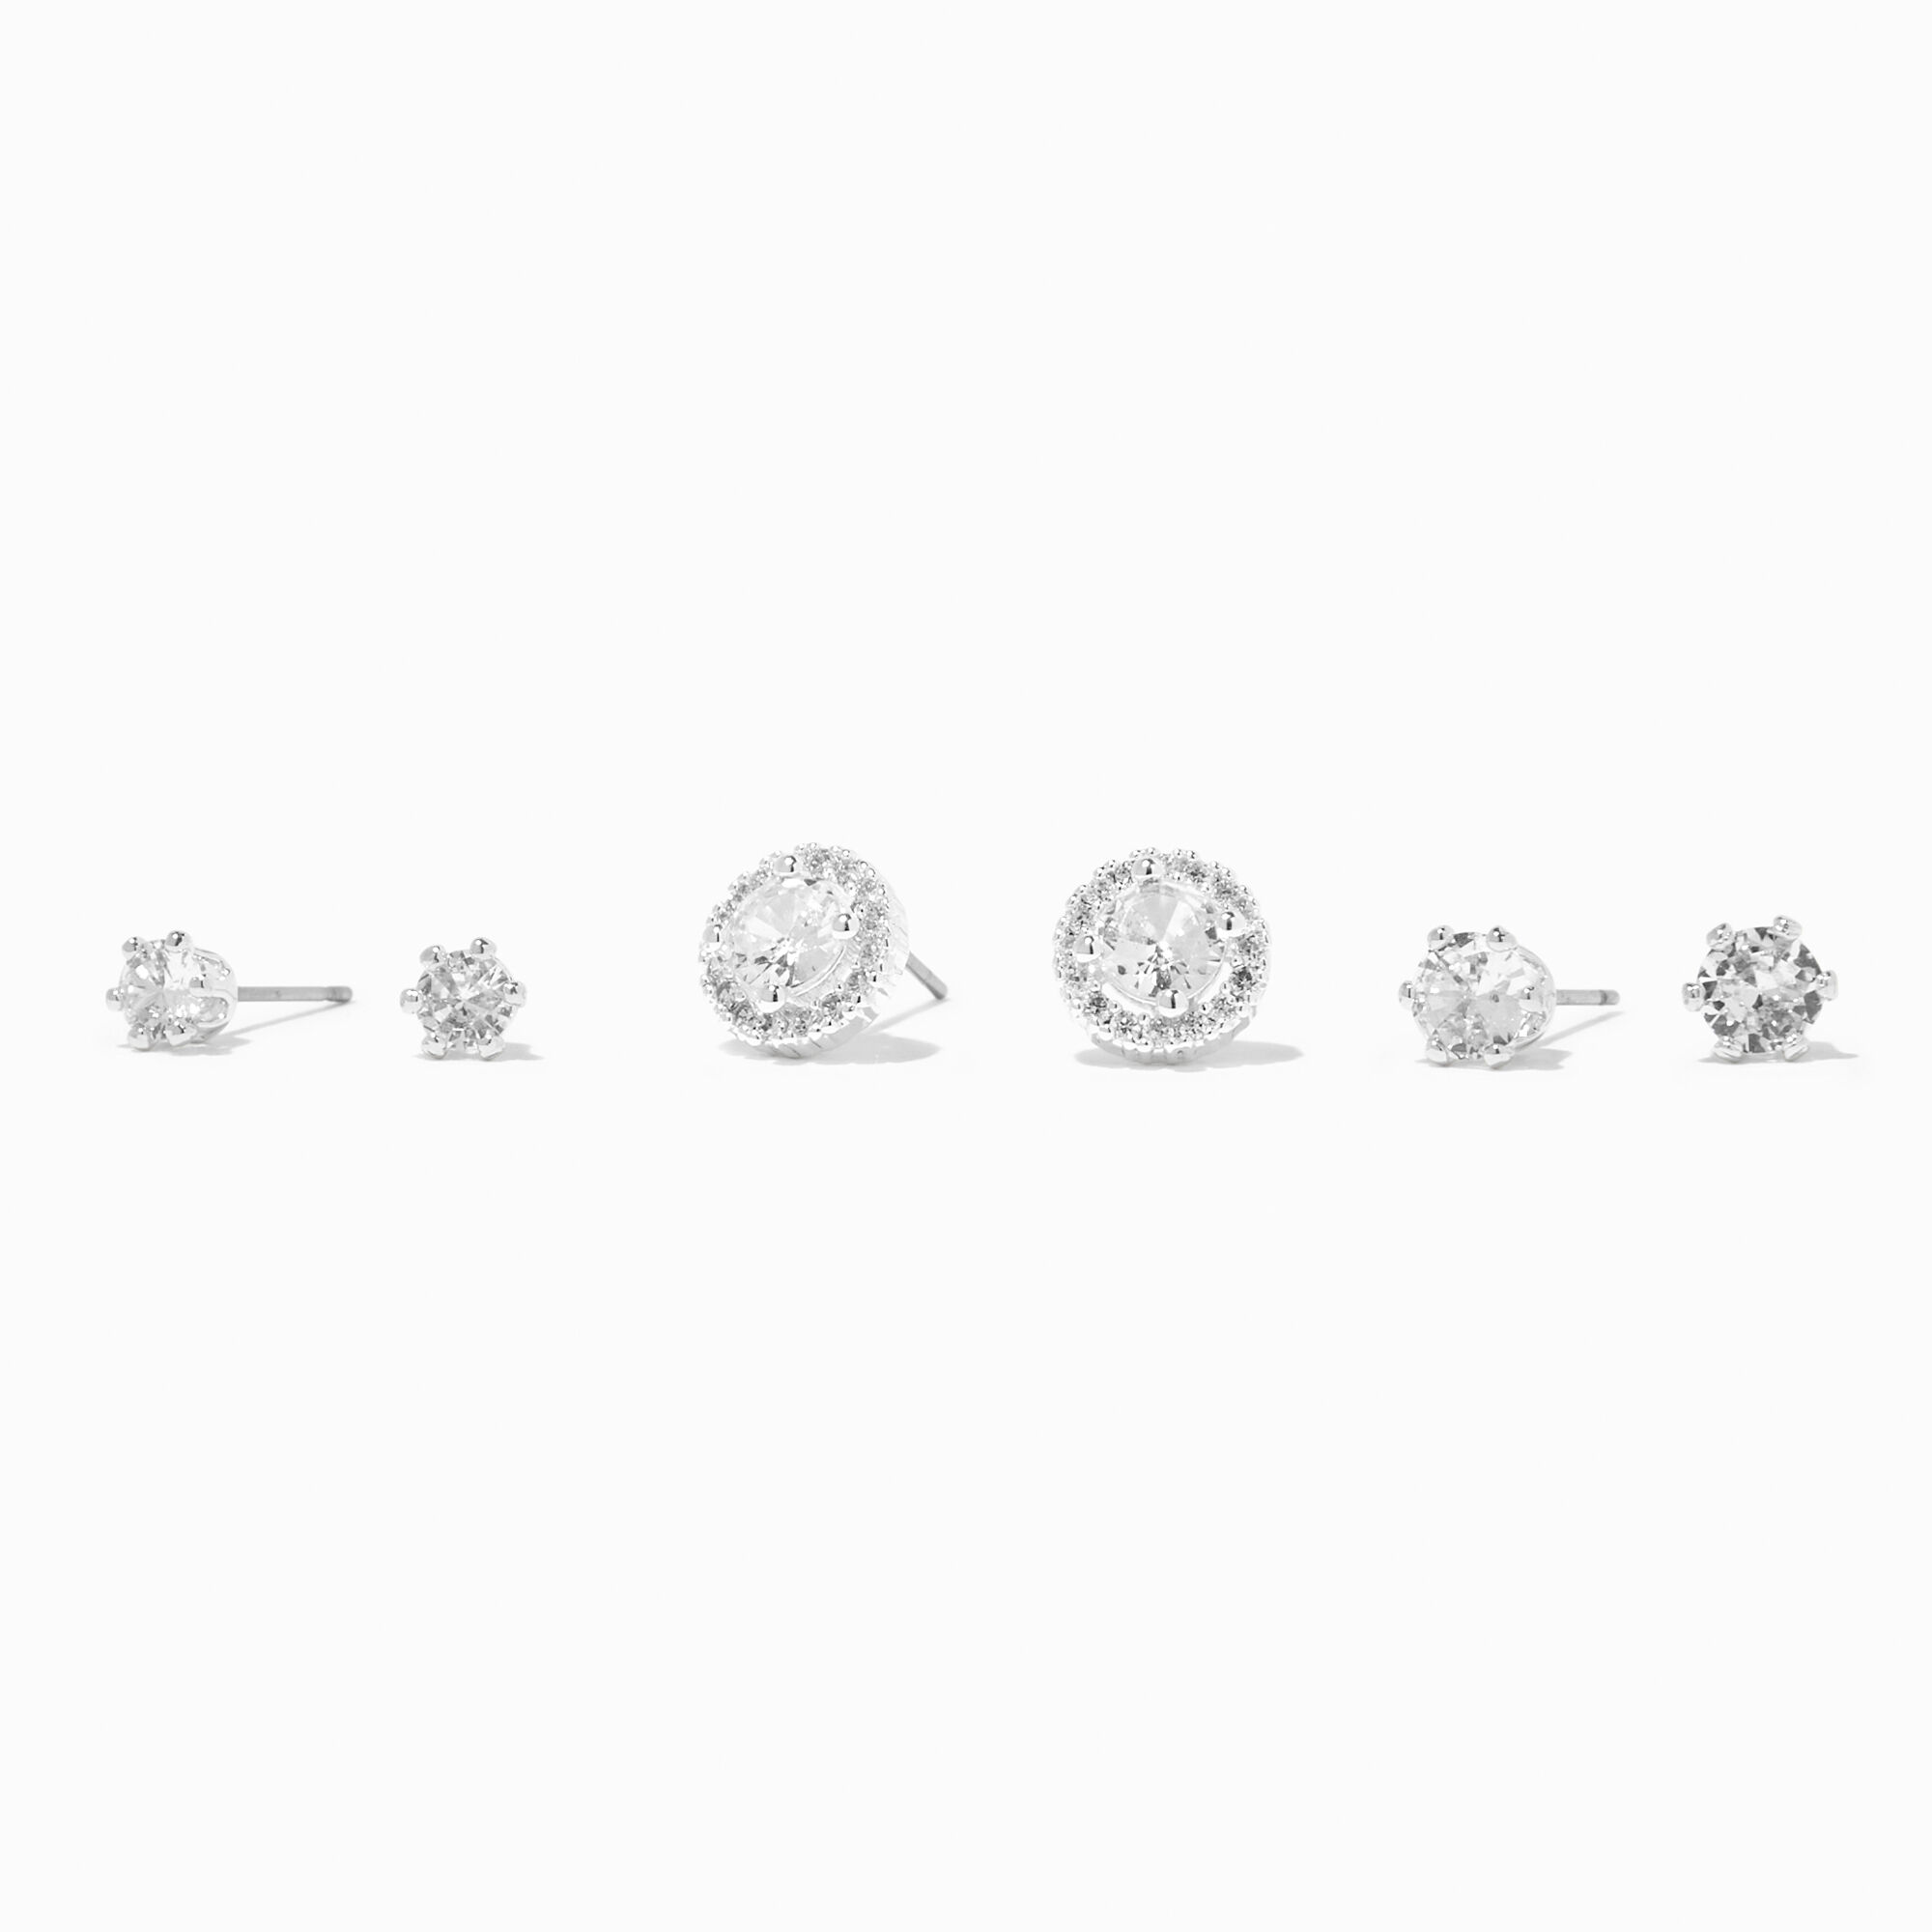 View Claires Halo Cubic Zirconia Studs Earrings 3 Pack Silver information